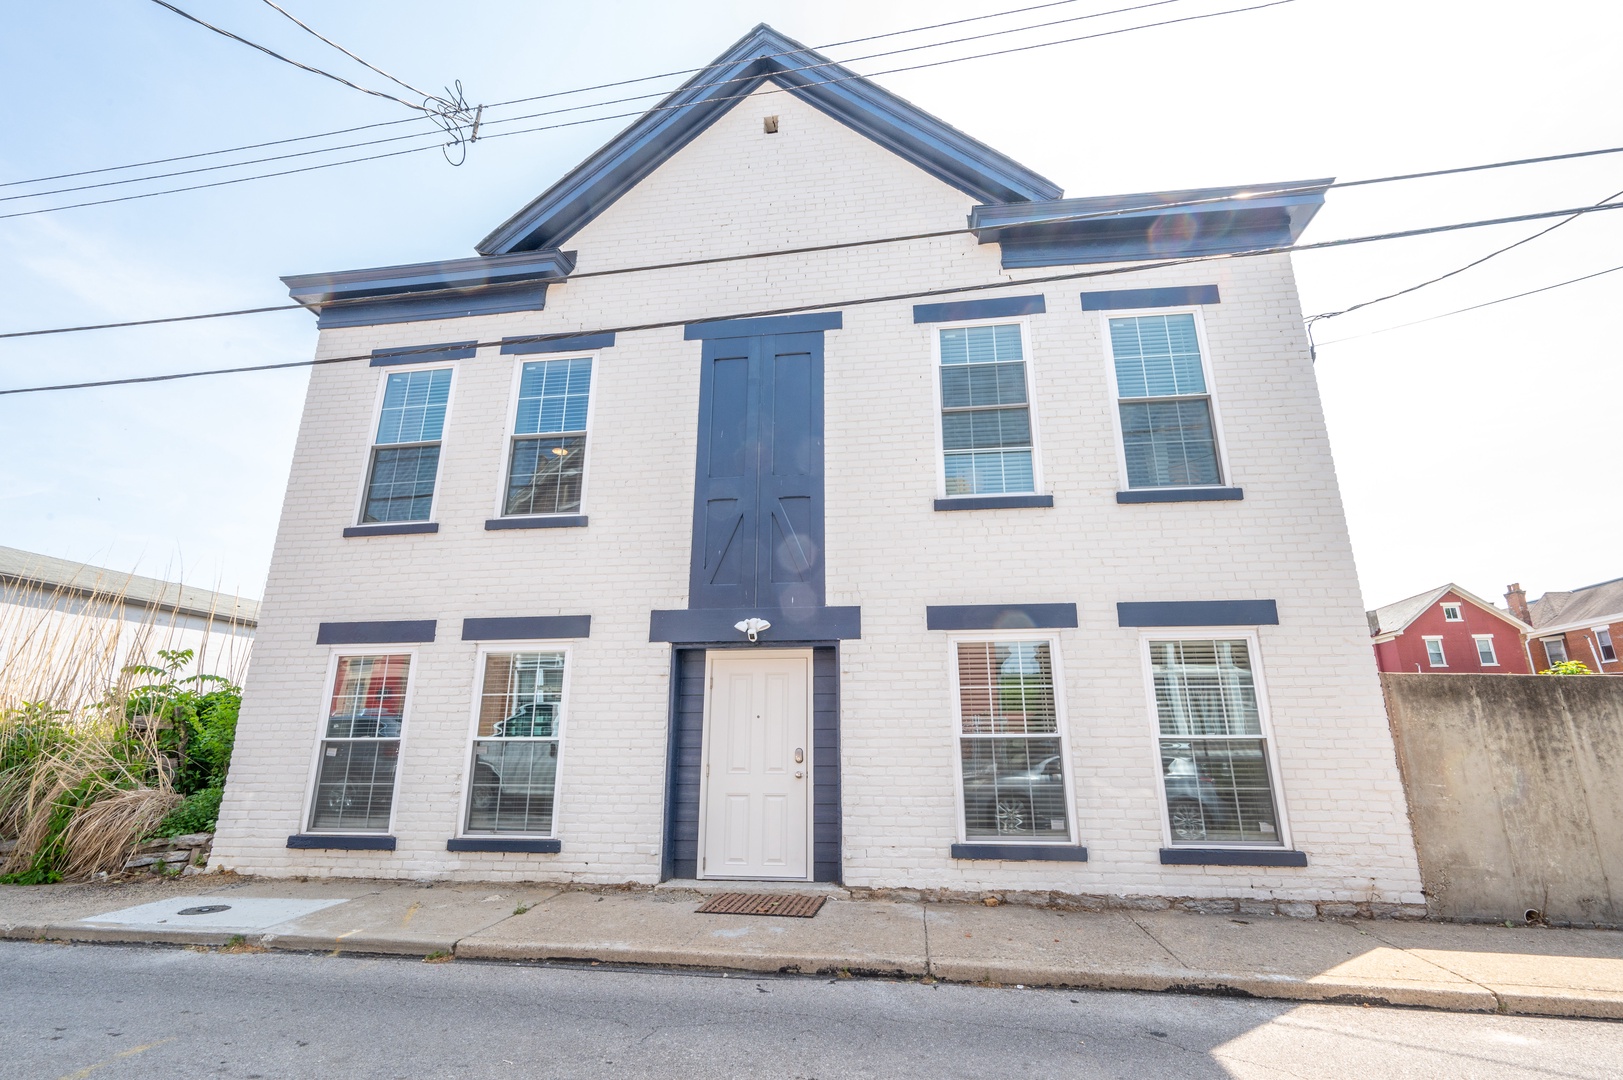 You will love the incredible updates to this charming historic building in Covington